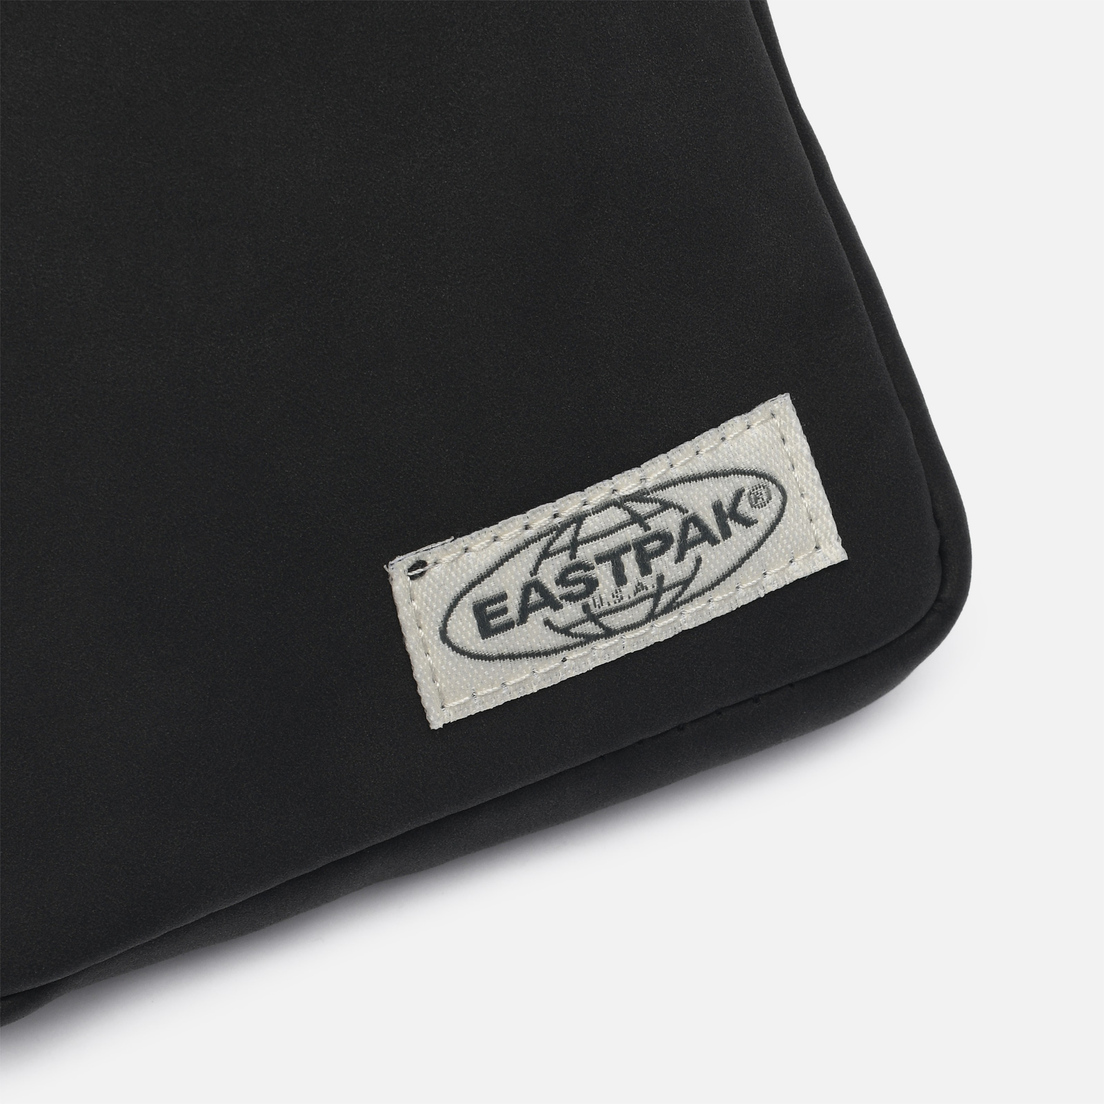 Eastpak Сумка Up Pouch